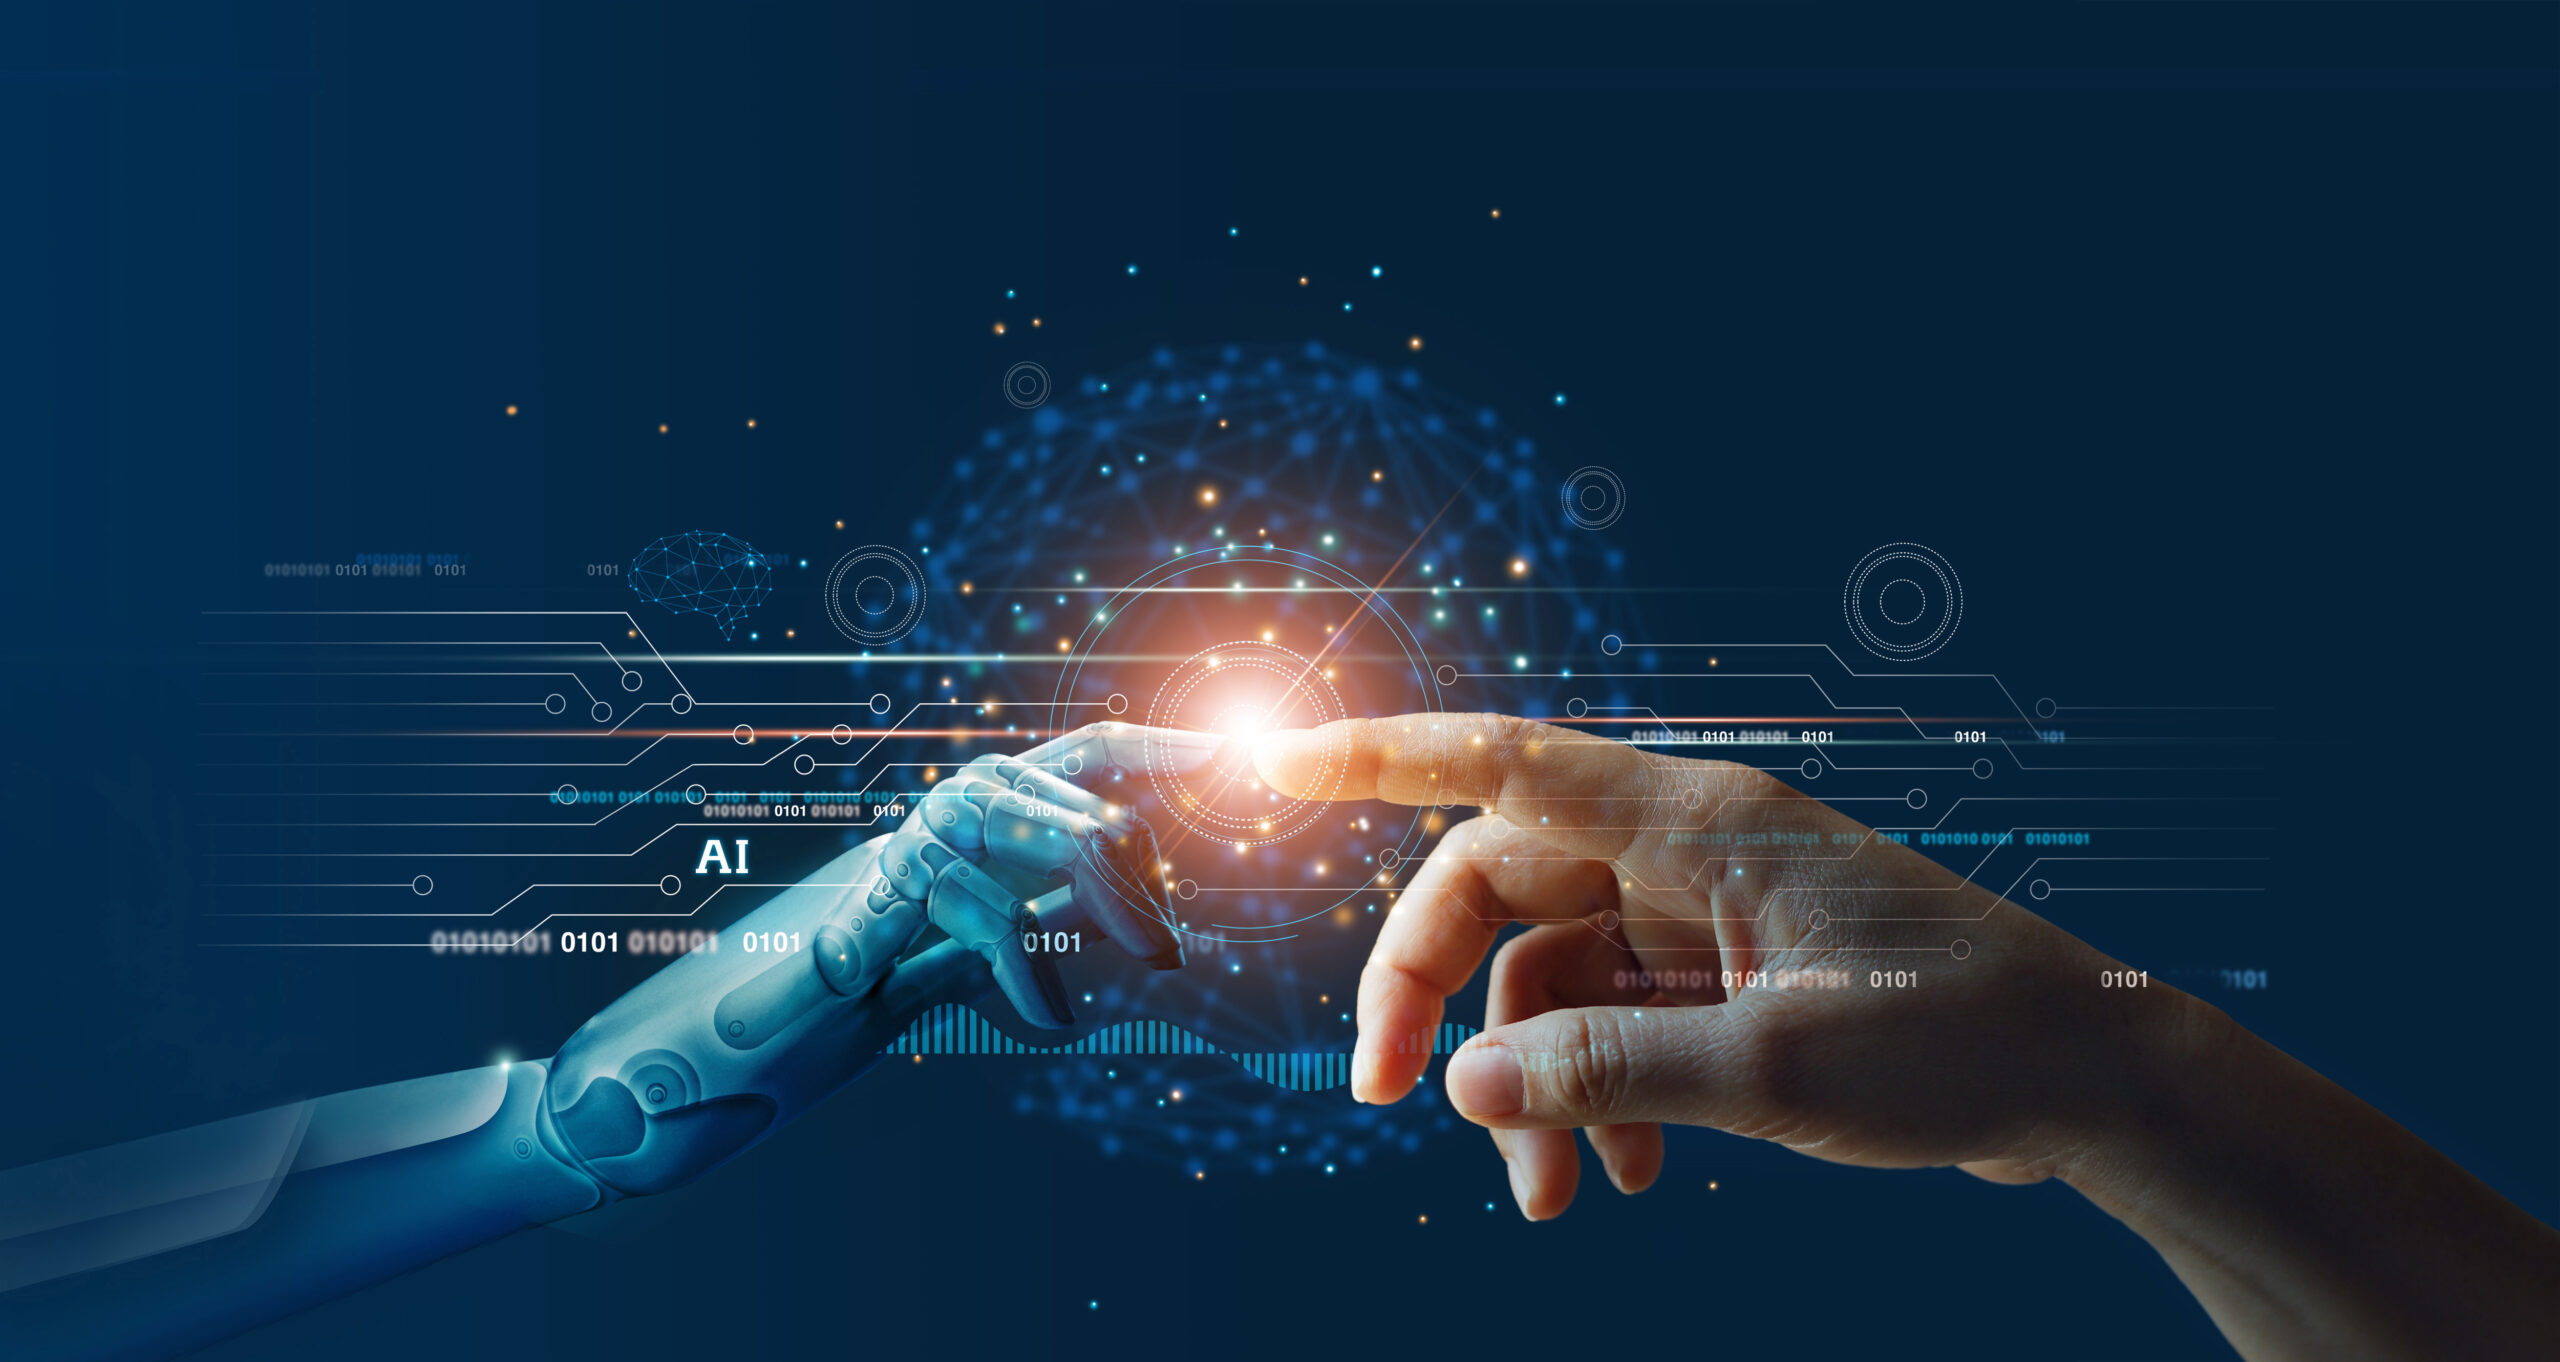 AI, Machine learning, Hands of robot and human touching on big data network connection background, Science and artificial intelligence technology, innovation and futuristic. stock photo